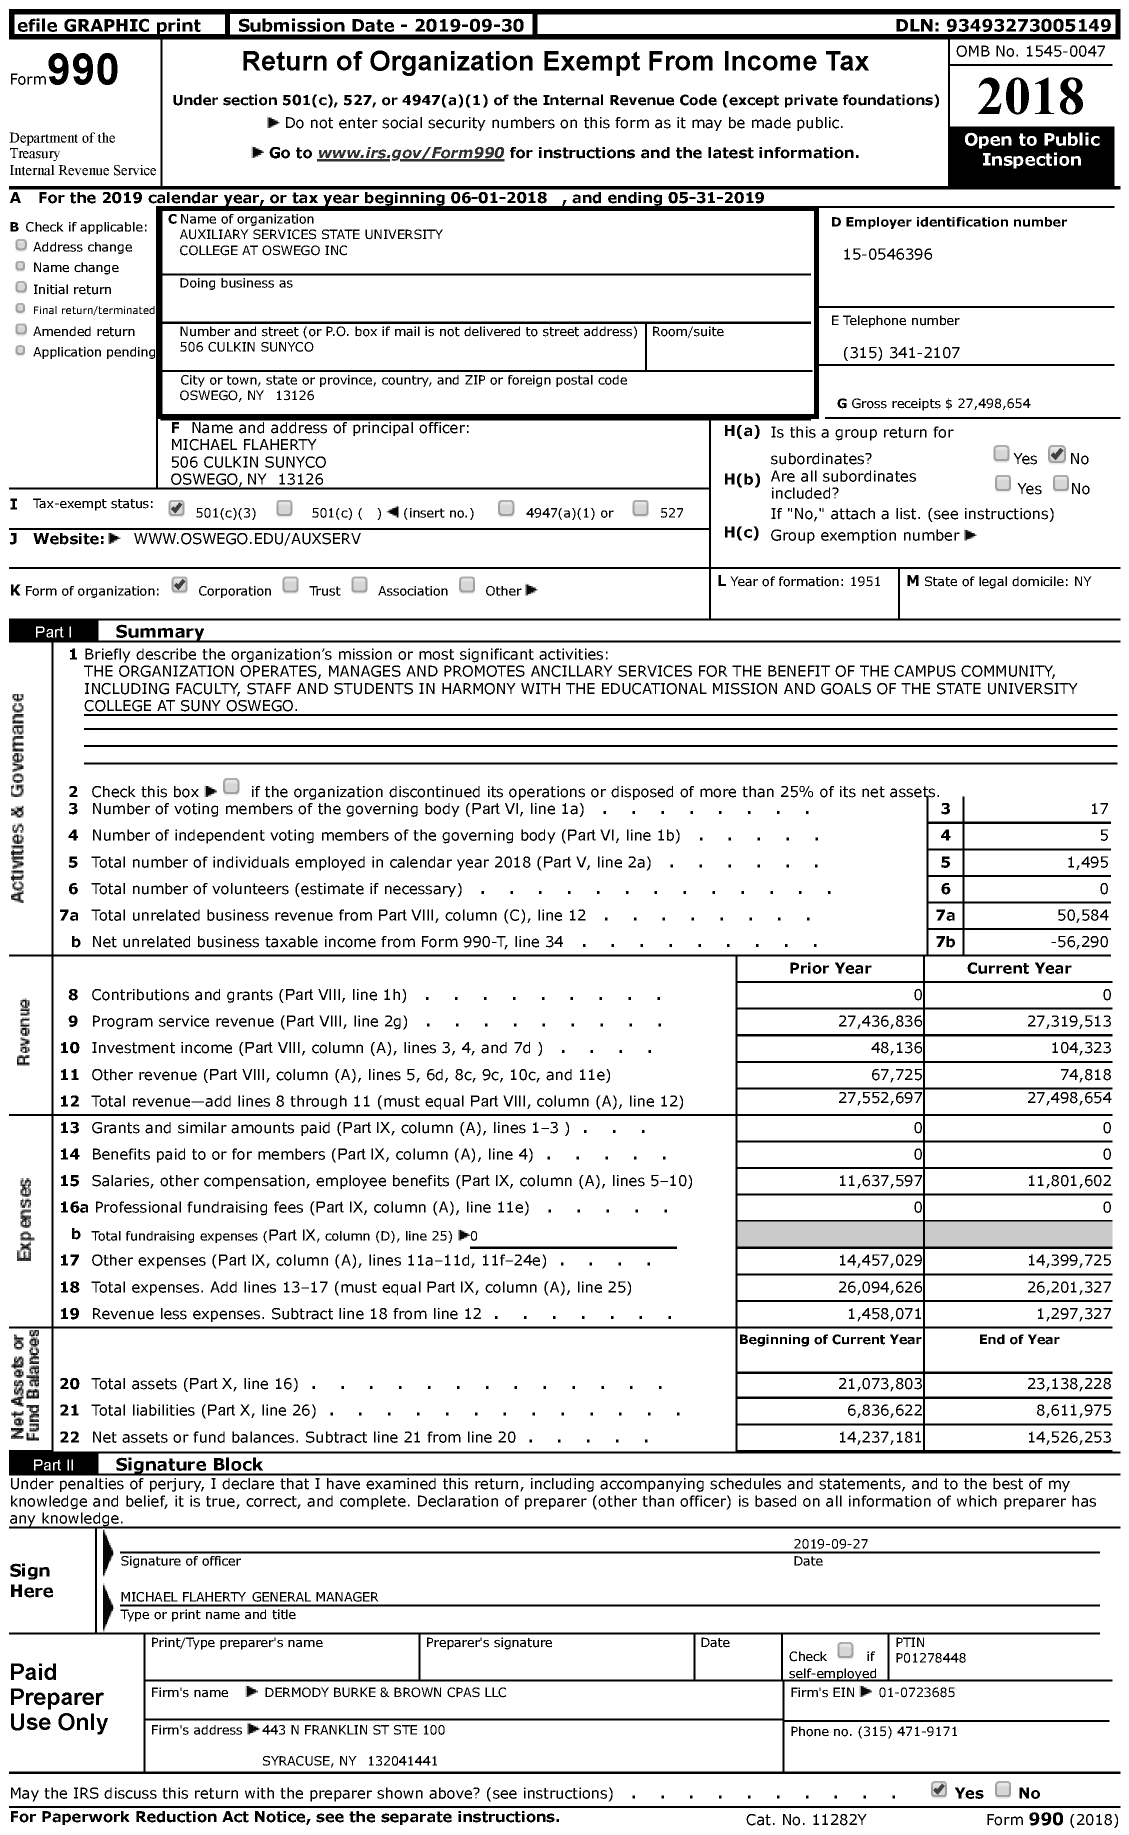 Image of first page of 2018 Form 990 for Auxiliary Services State University College at Oswego